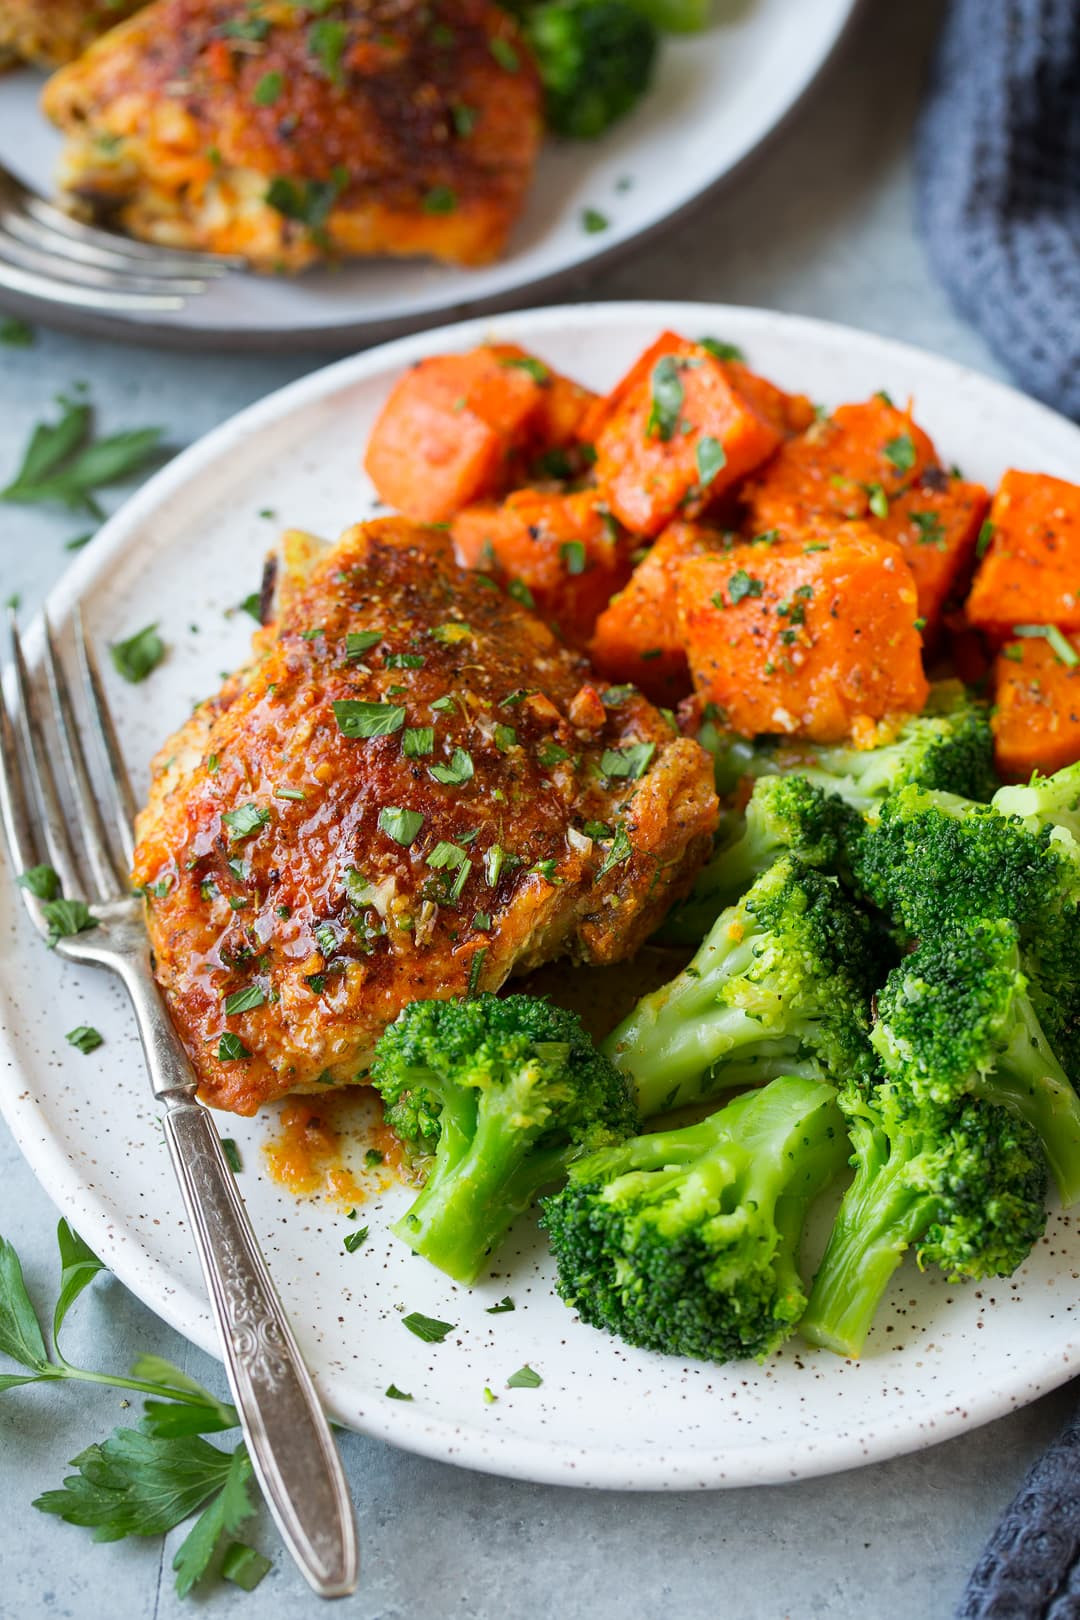 Chicken And Broccoli Recipes
 Slow Cooker Chicken with Sweet Potatoes and Broccoli